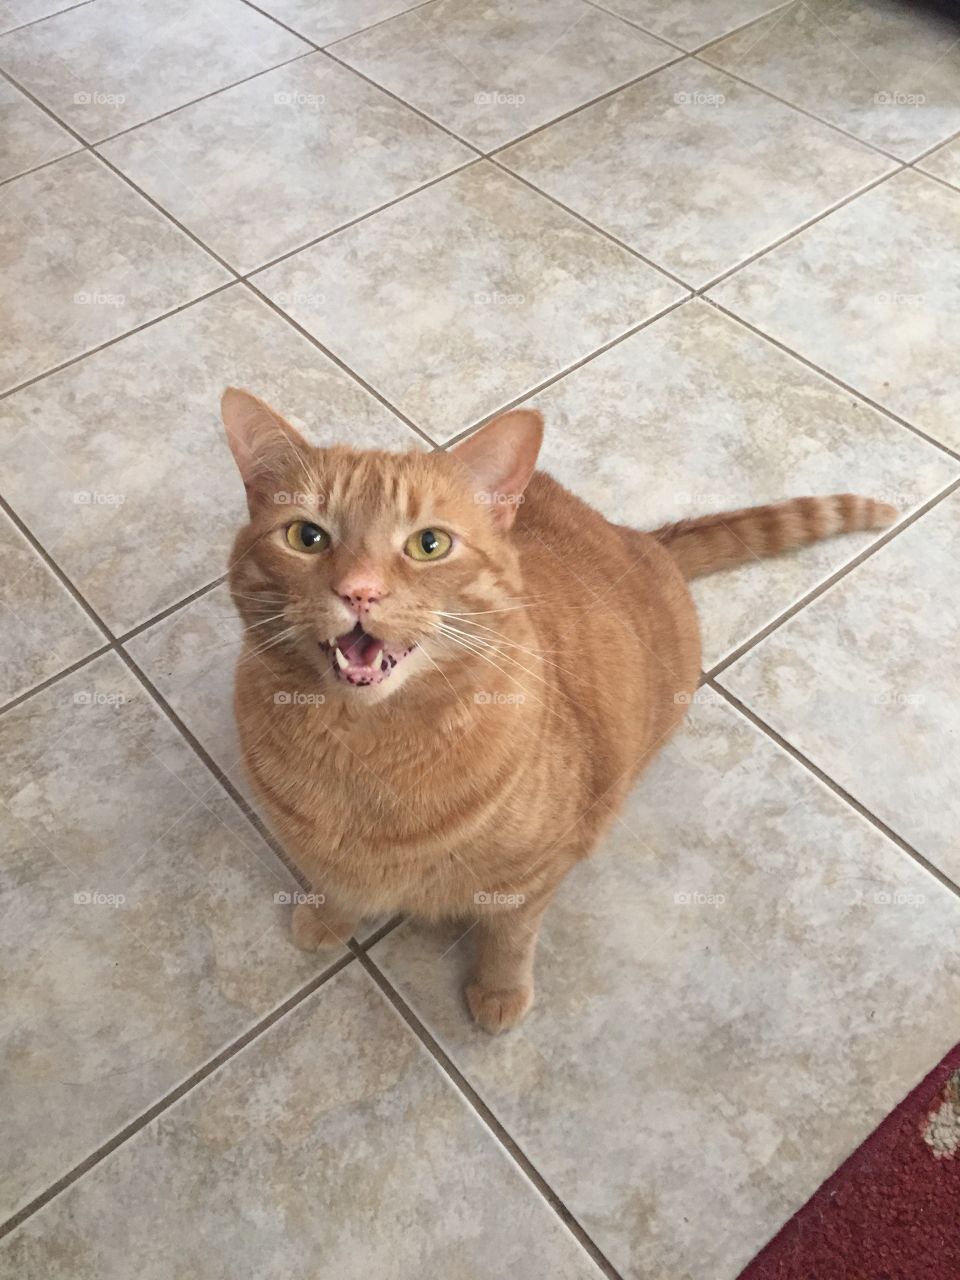 Meowing for food.